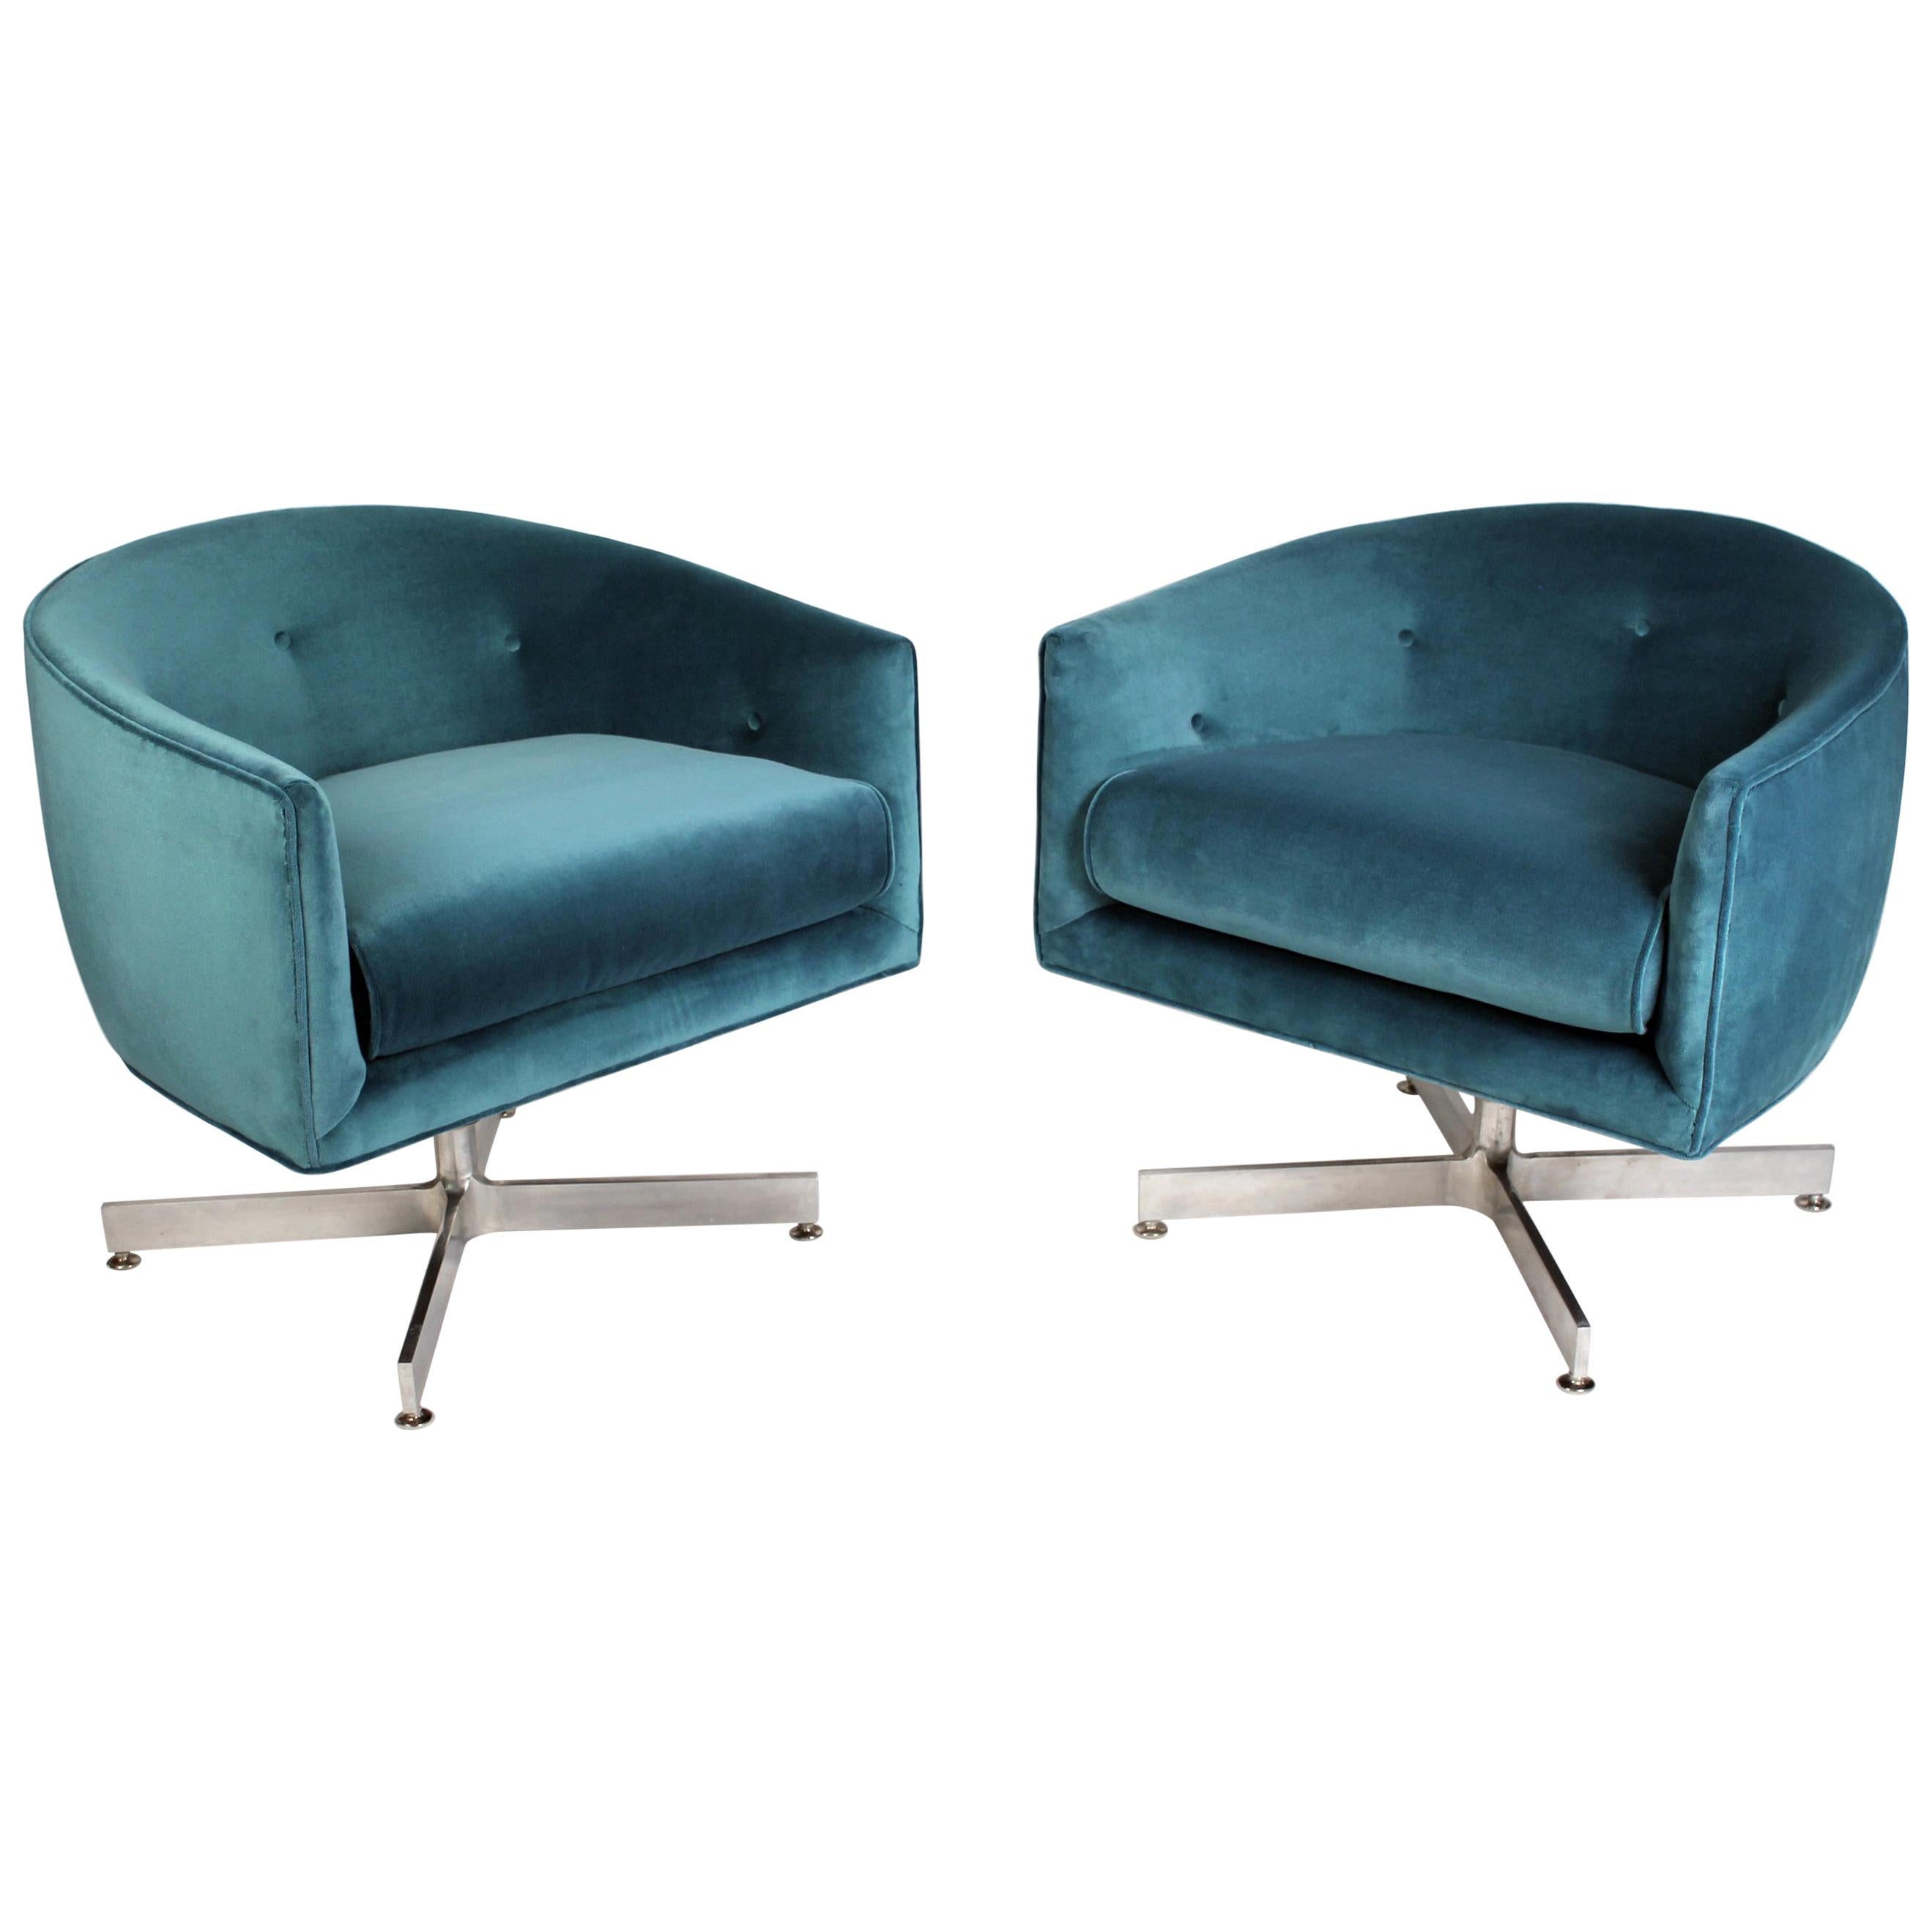 Milo Baughman Tilt and Swivel Lounge Chairs for Thayer Coggin